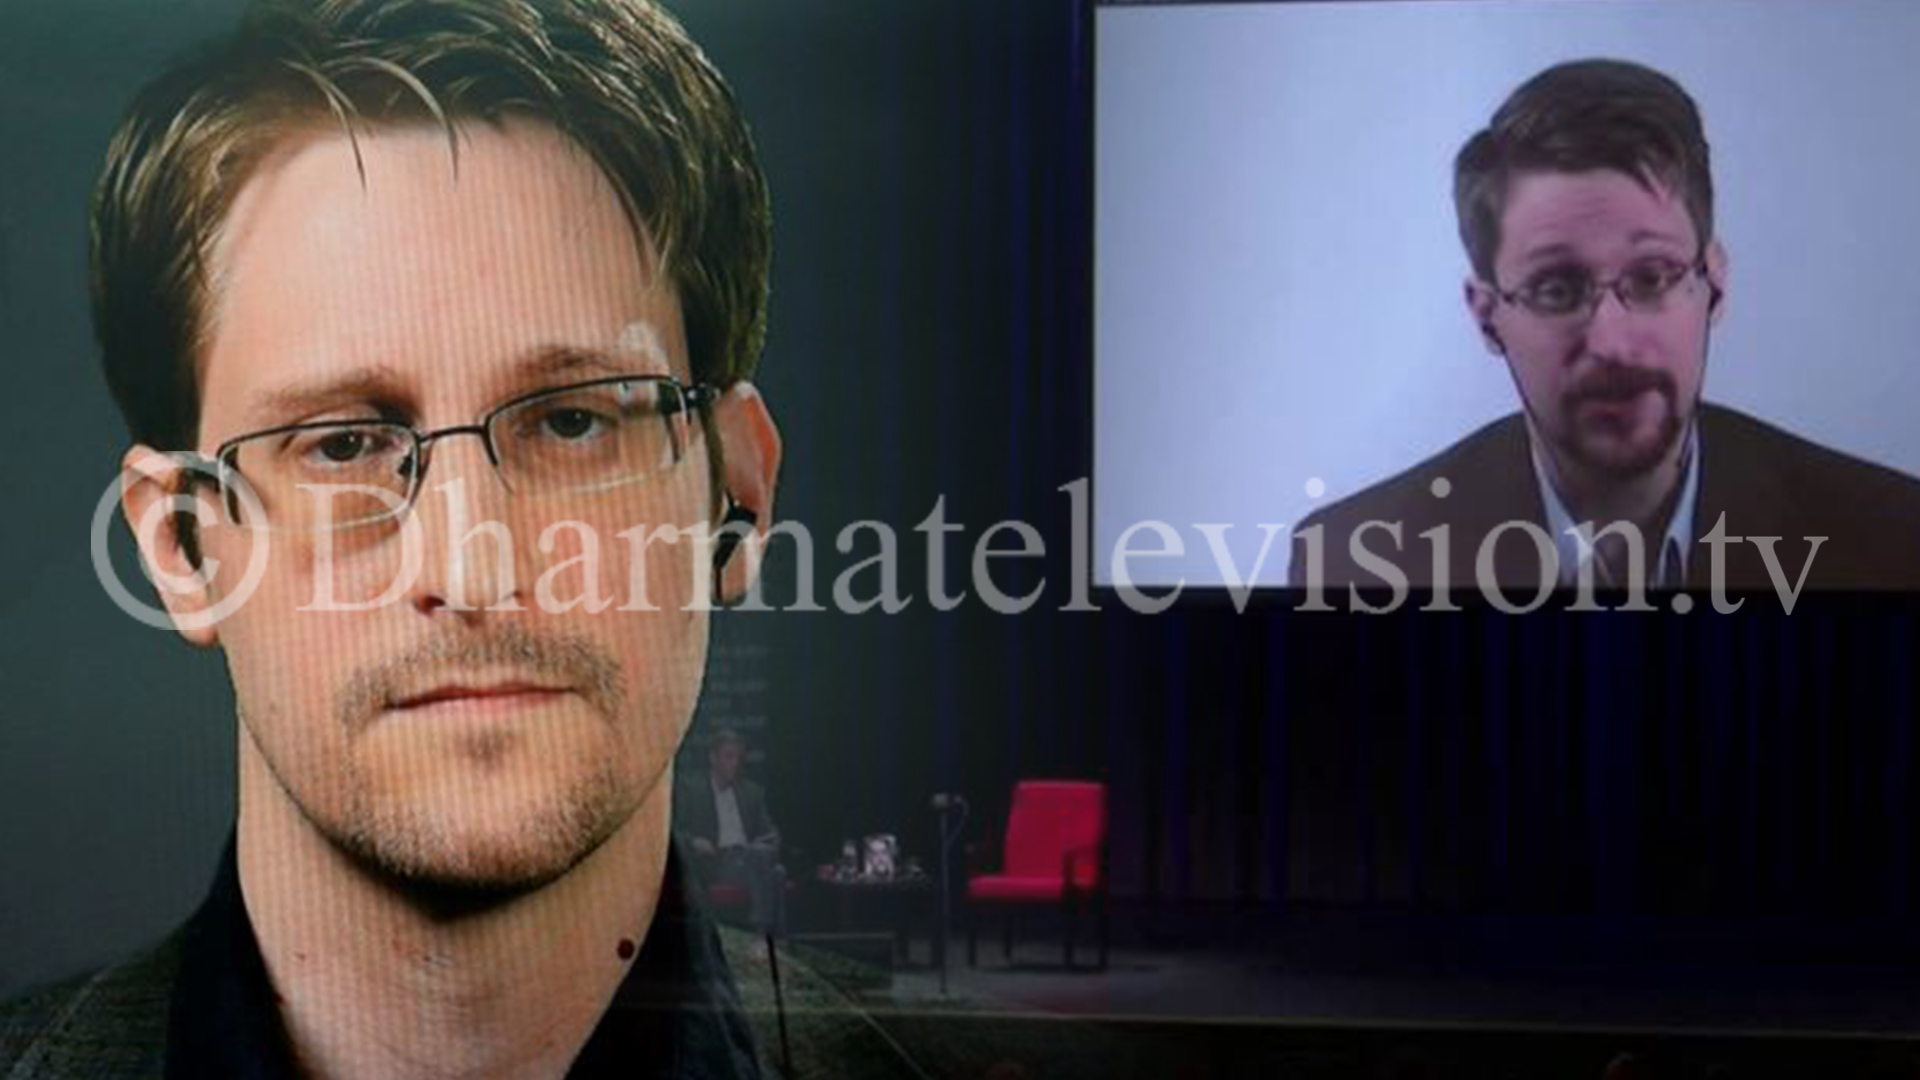 U.S. whistleblower Snowden-Wanted in the USA-living in Russia, seeks Russian citizenship